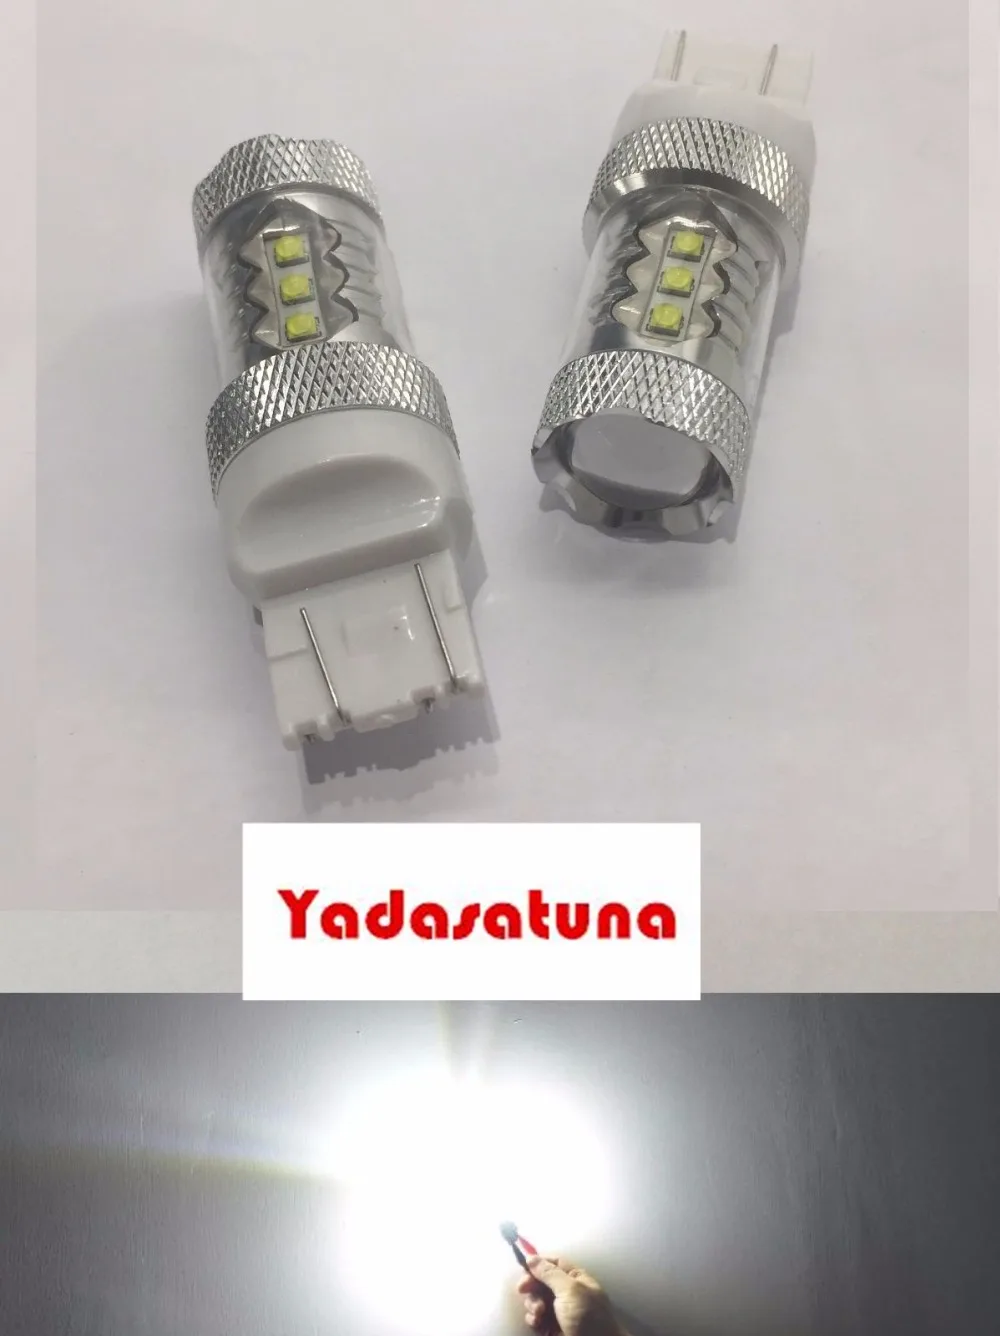 Pair CANBUS CREE Chip Car LED XENON6000K WHITE 7443 W21/5W T20 DRL DAYTIME RUNNING LIGHT BULB 2 Years Warranty